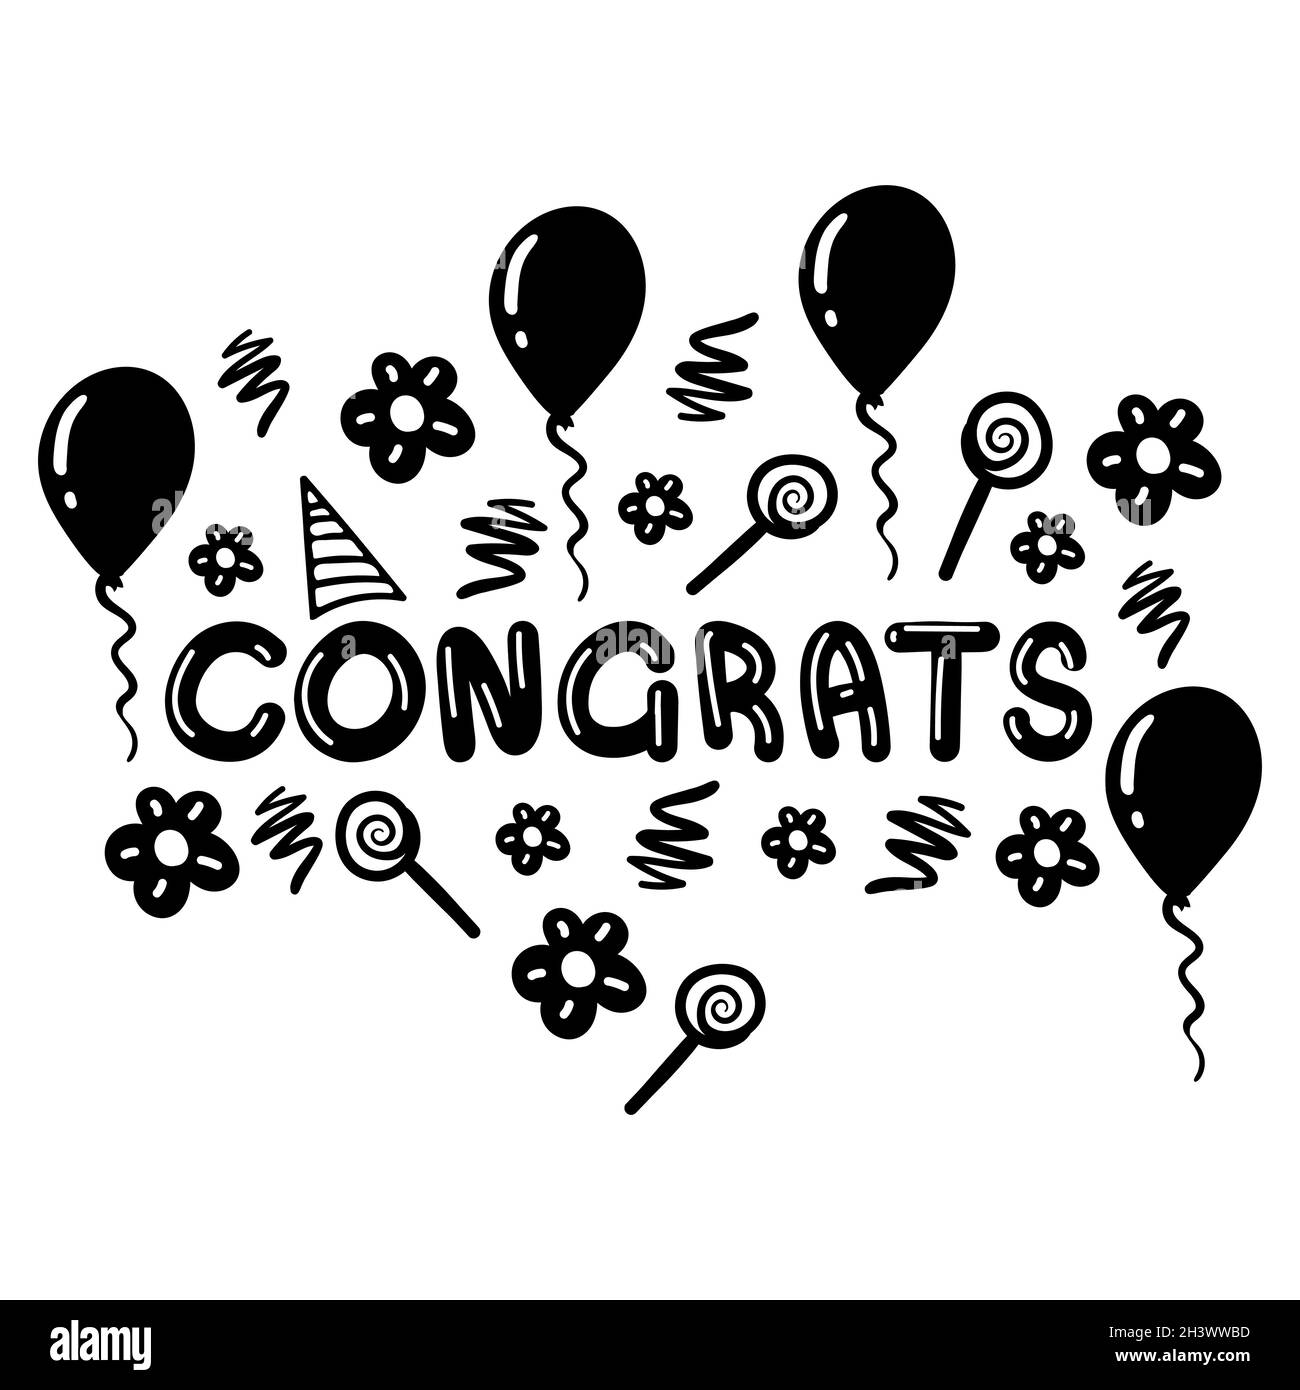 Congrats lettering with decor. Isolated on white background. Stock Vector